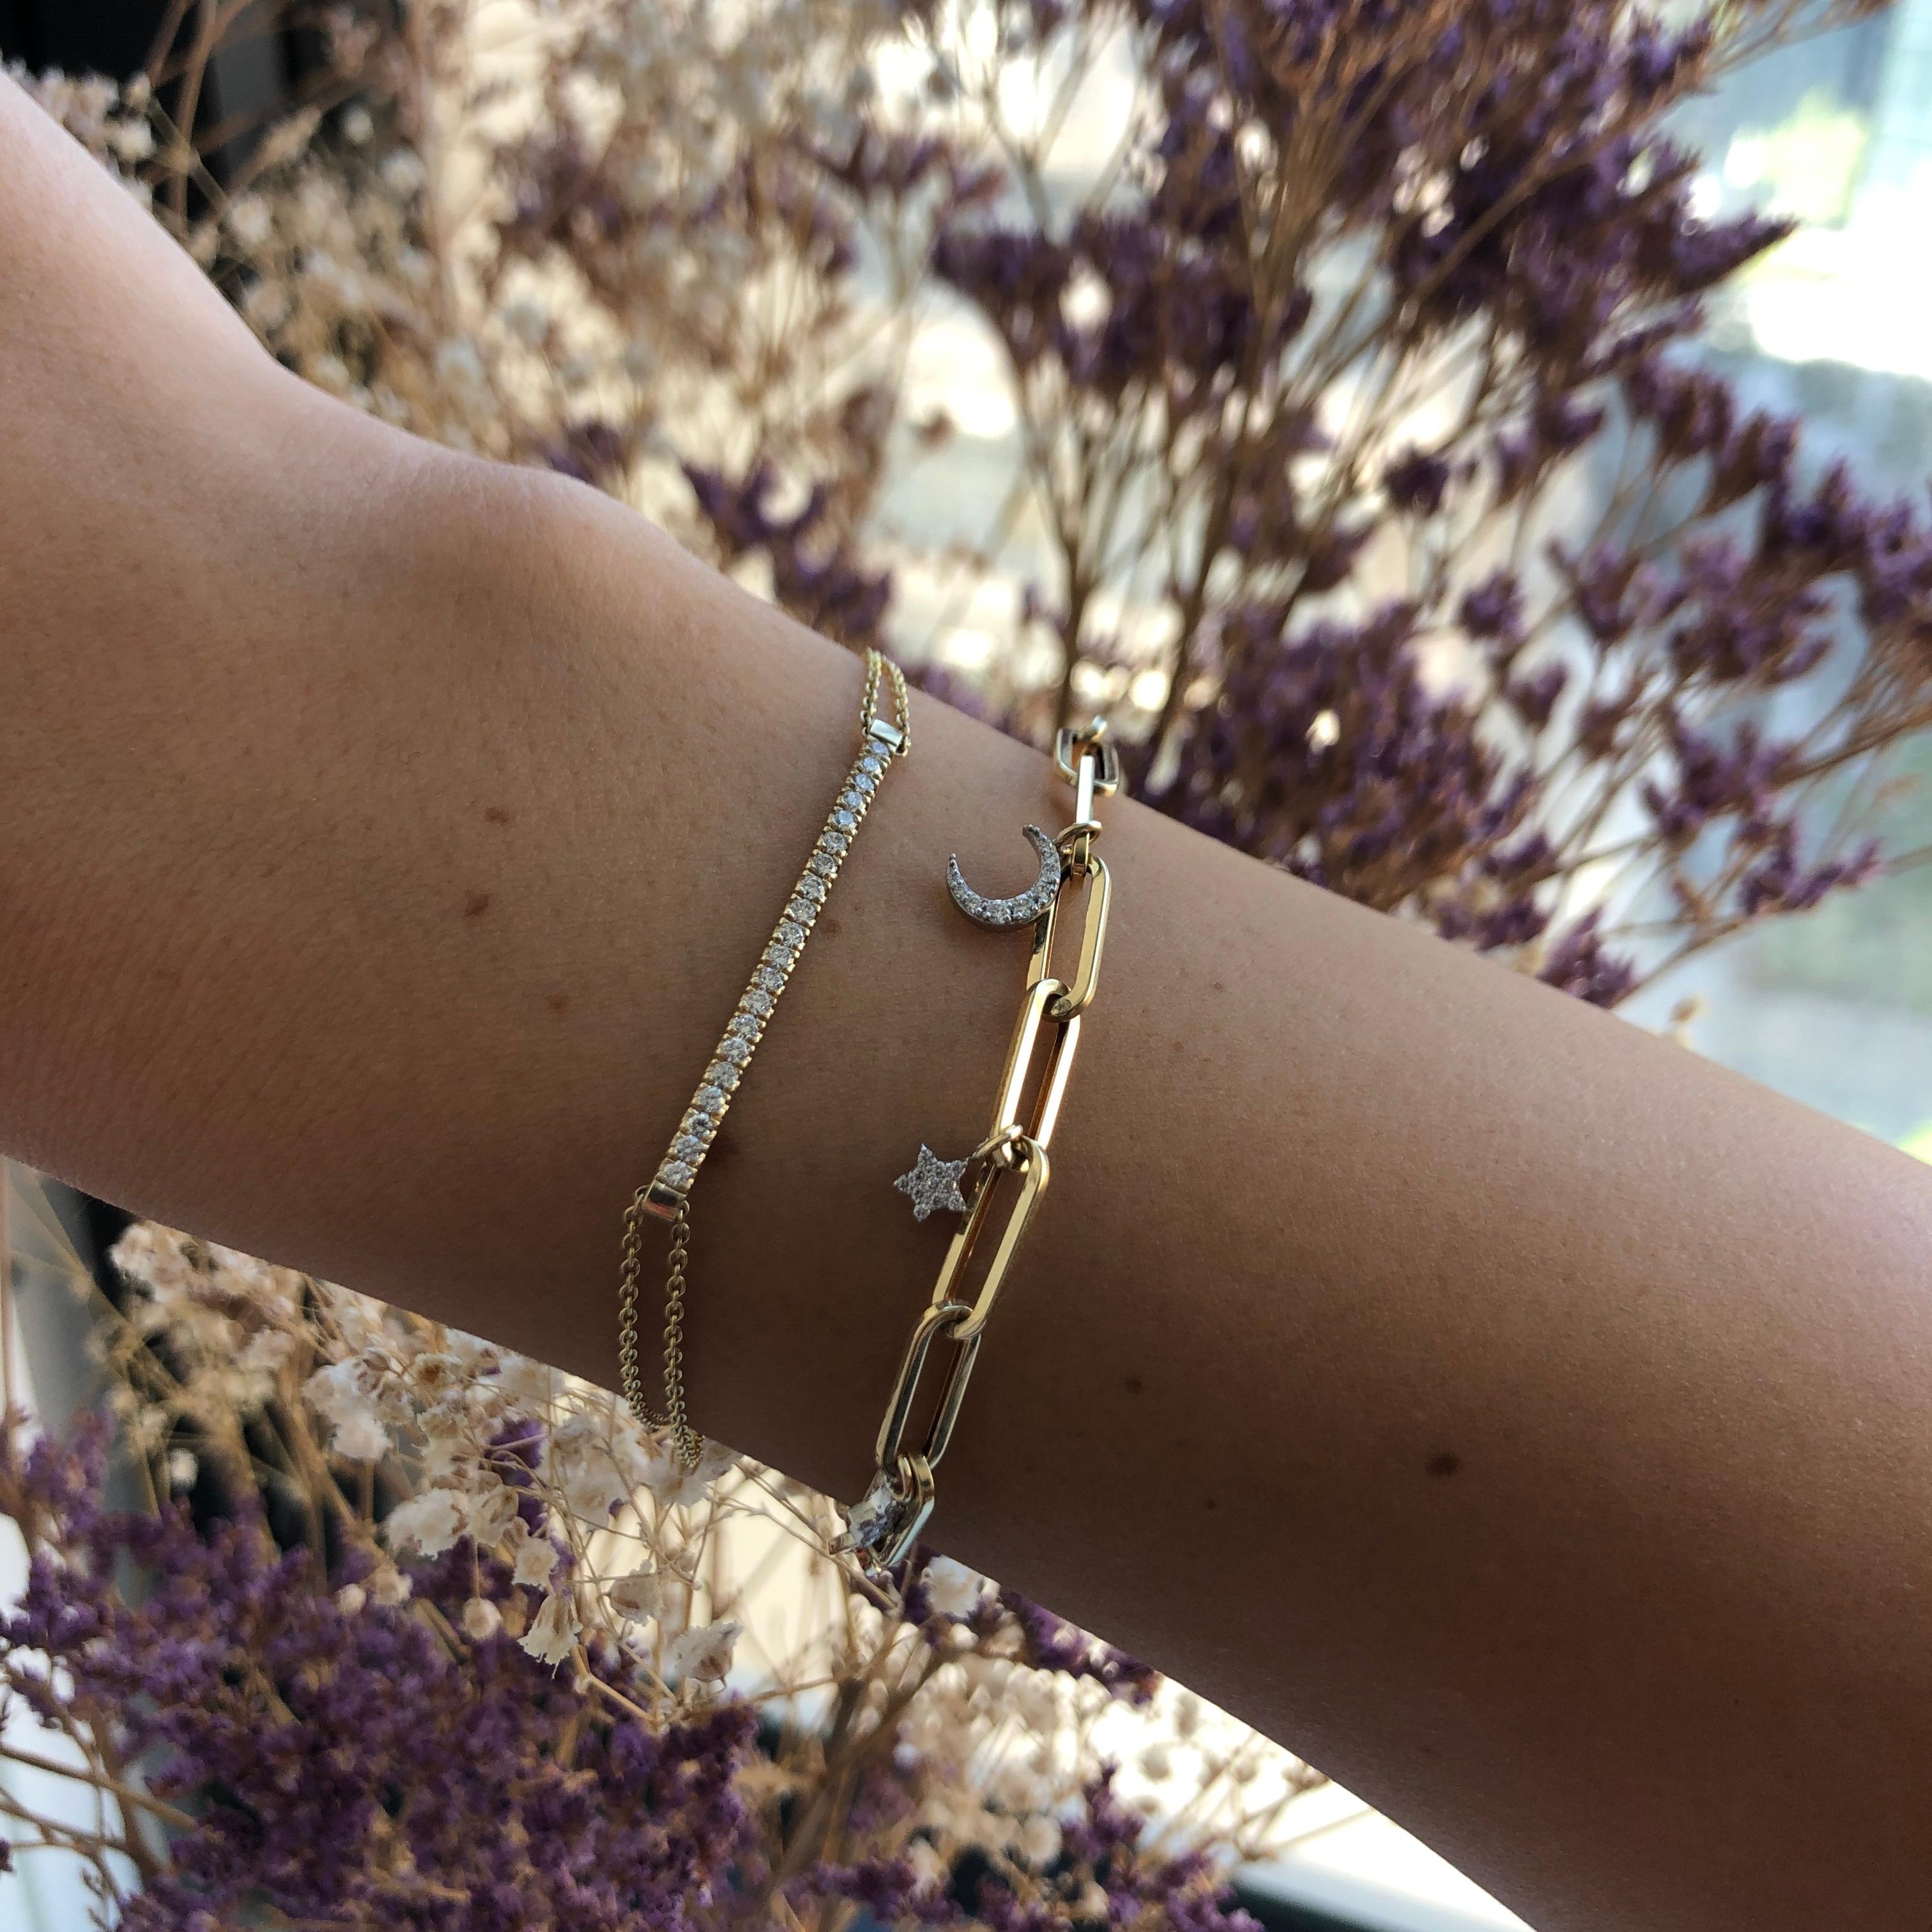 0.14 Carat Diamond Moon and Star Charms Cable Chain Bracelet - Shlomit Rogel - Make a Wish Collection

Shine bright in this stand-out bracelet! Crafted from 14k yellow gold, this lush cable chain is adorned with diamond moon and 2 star charms that